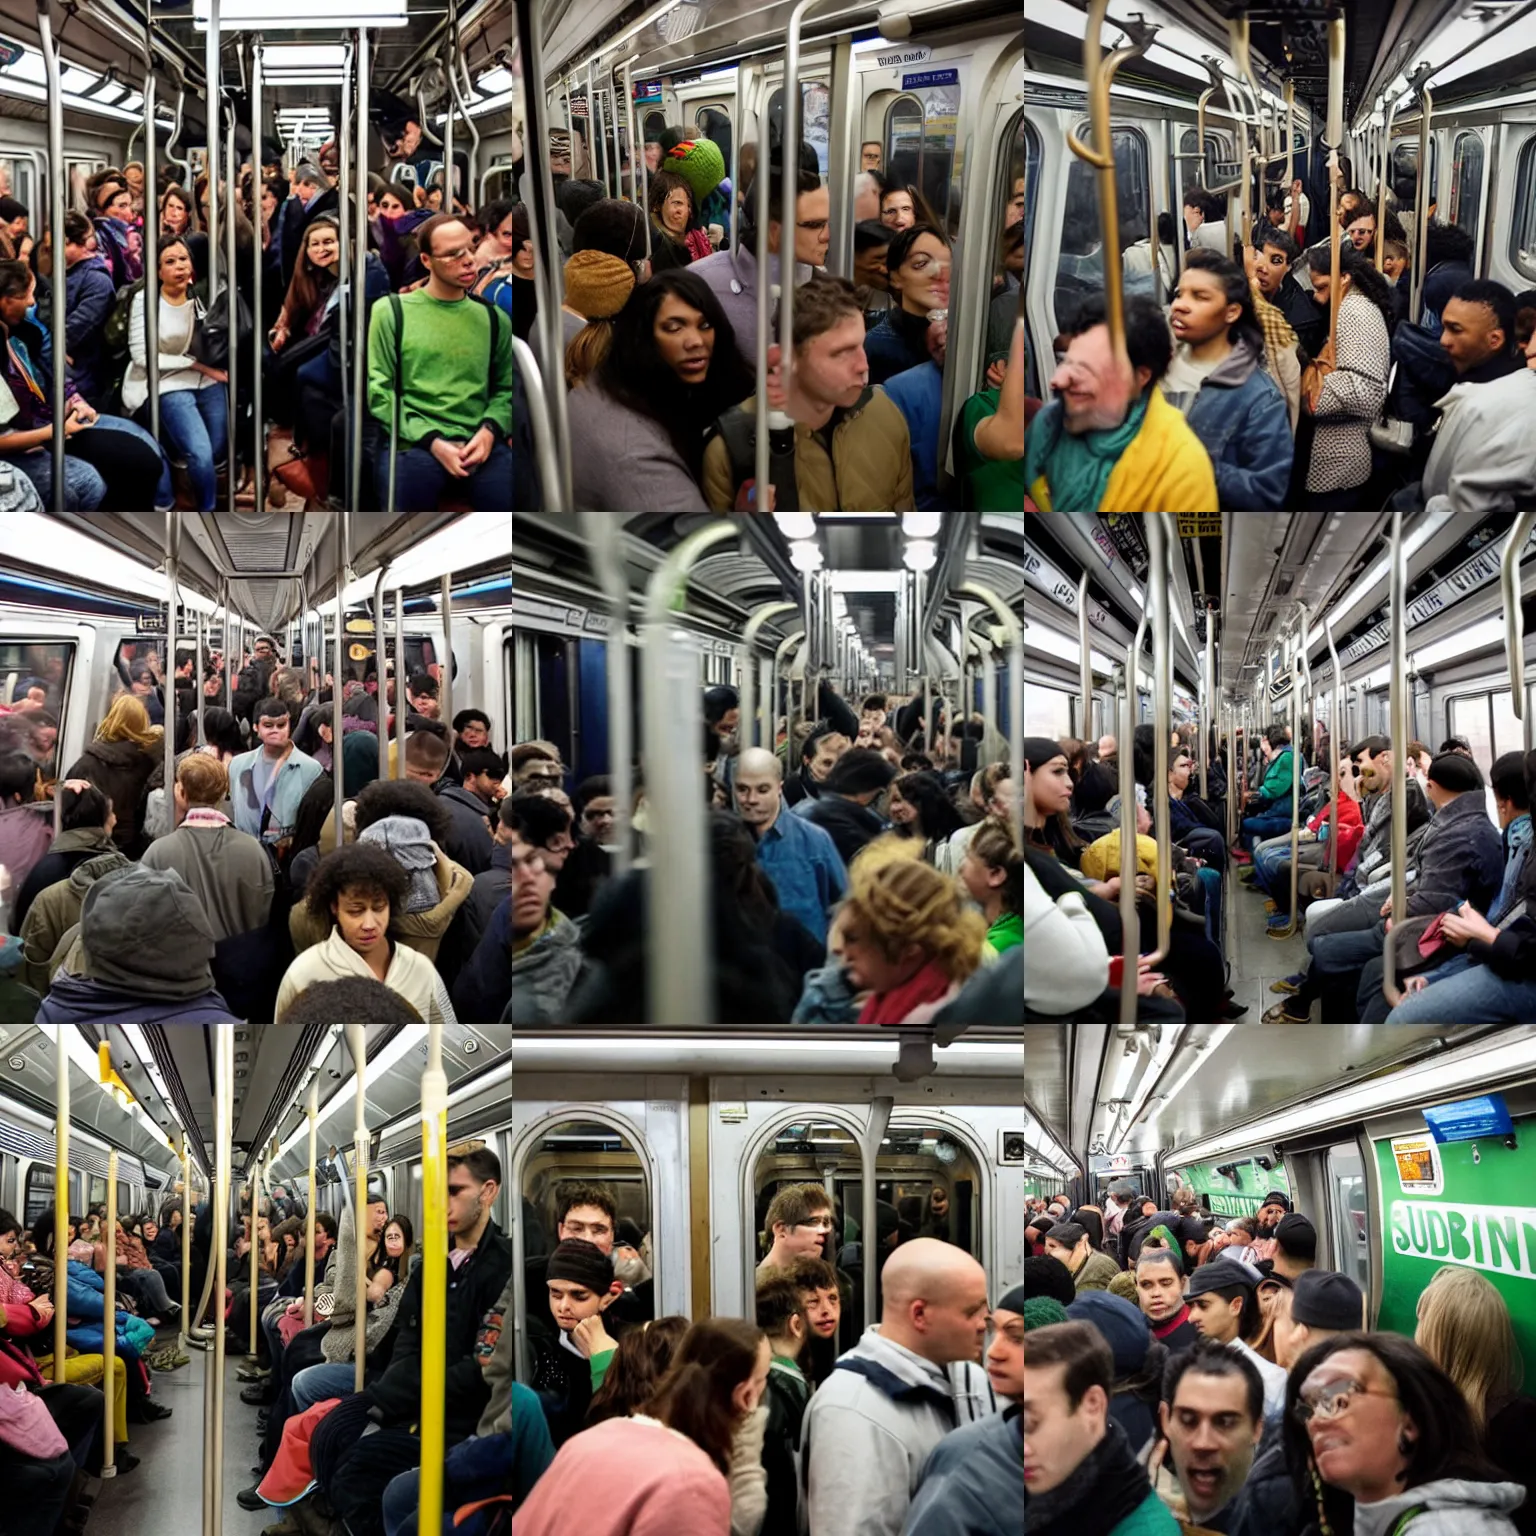 Prompt: a crowded subway car whose passengers are all humanoid frogs wearing clothing